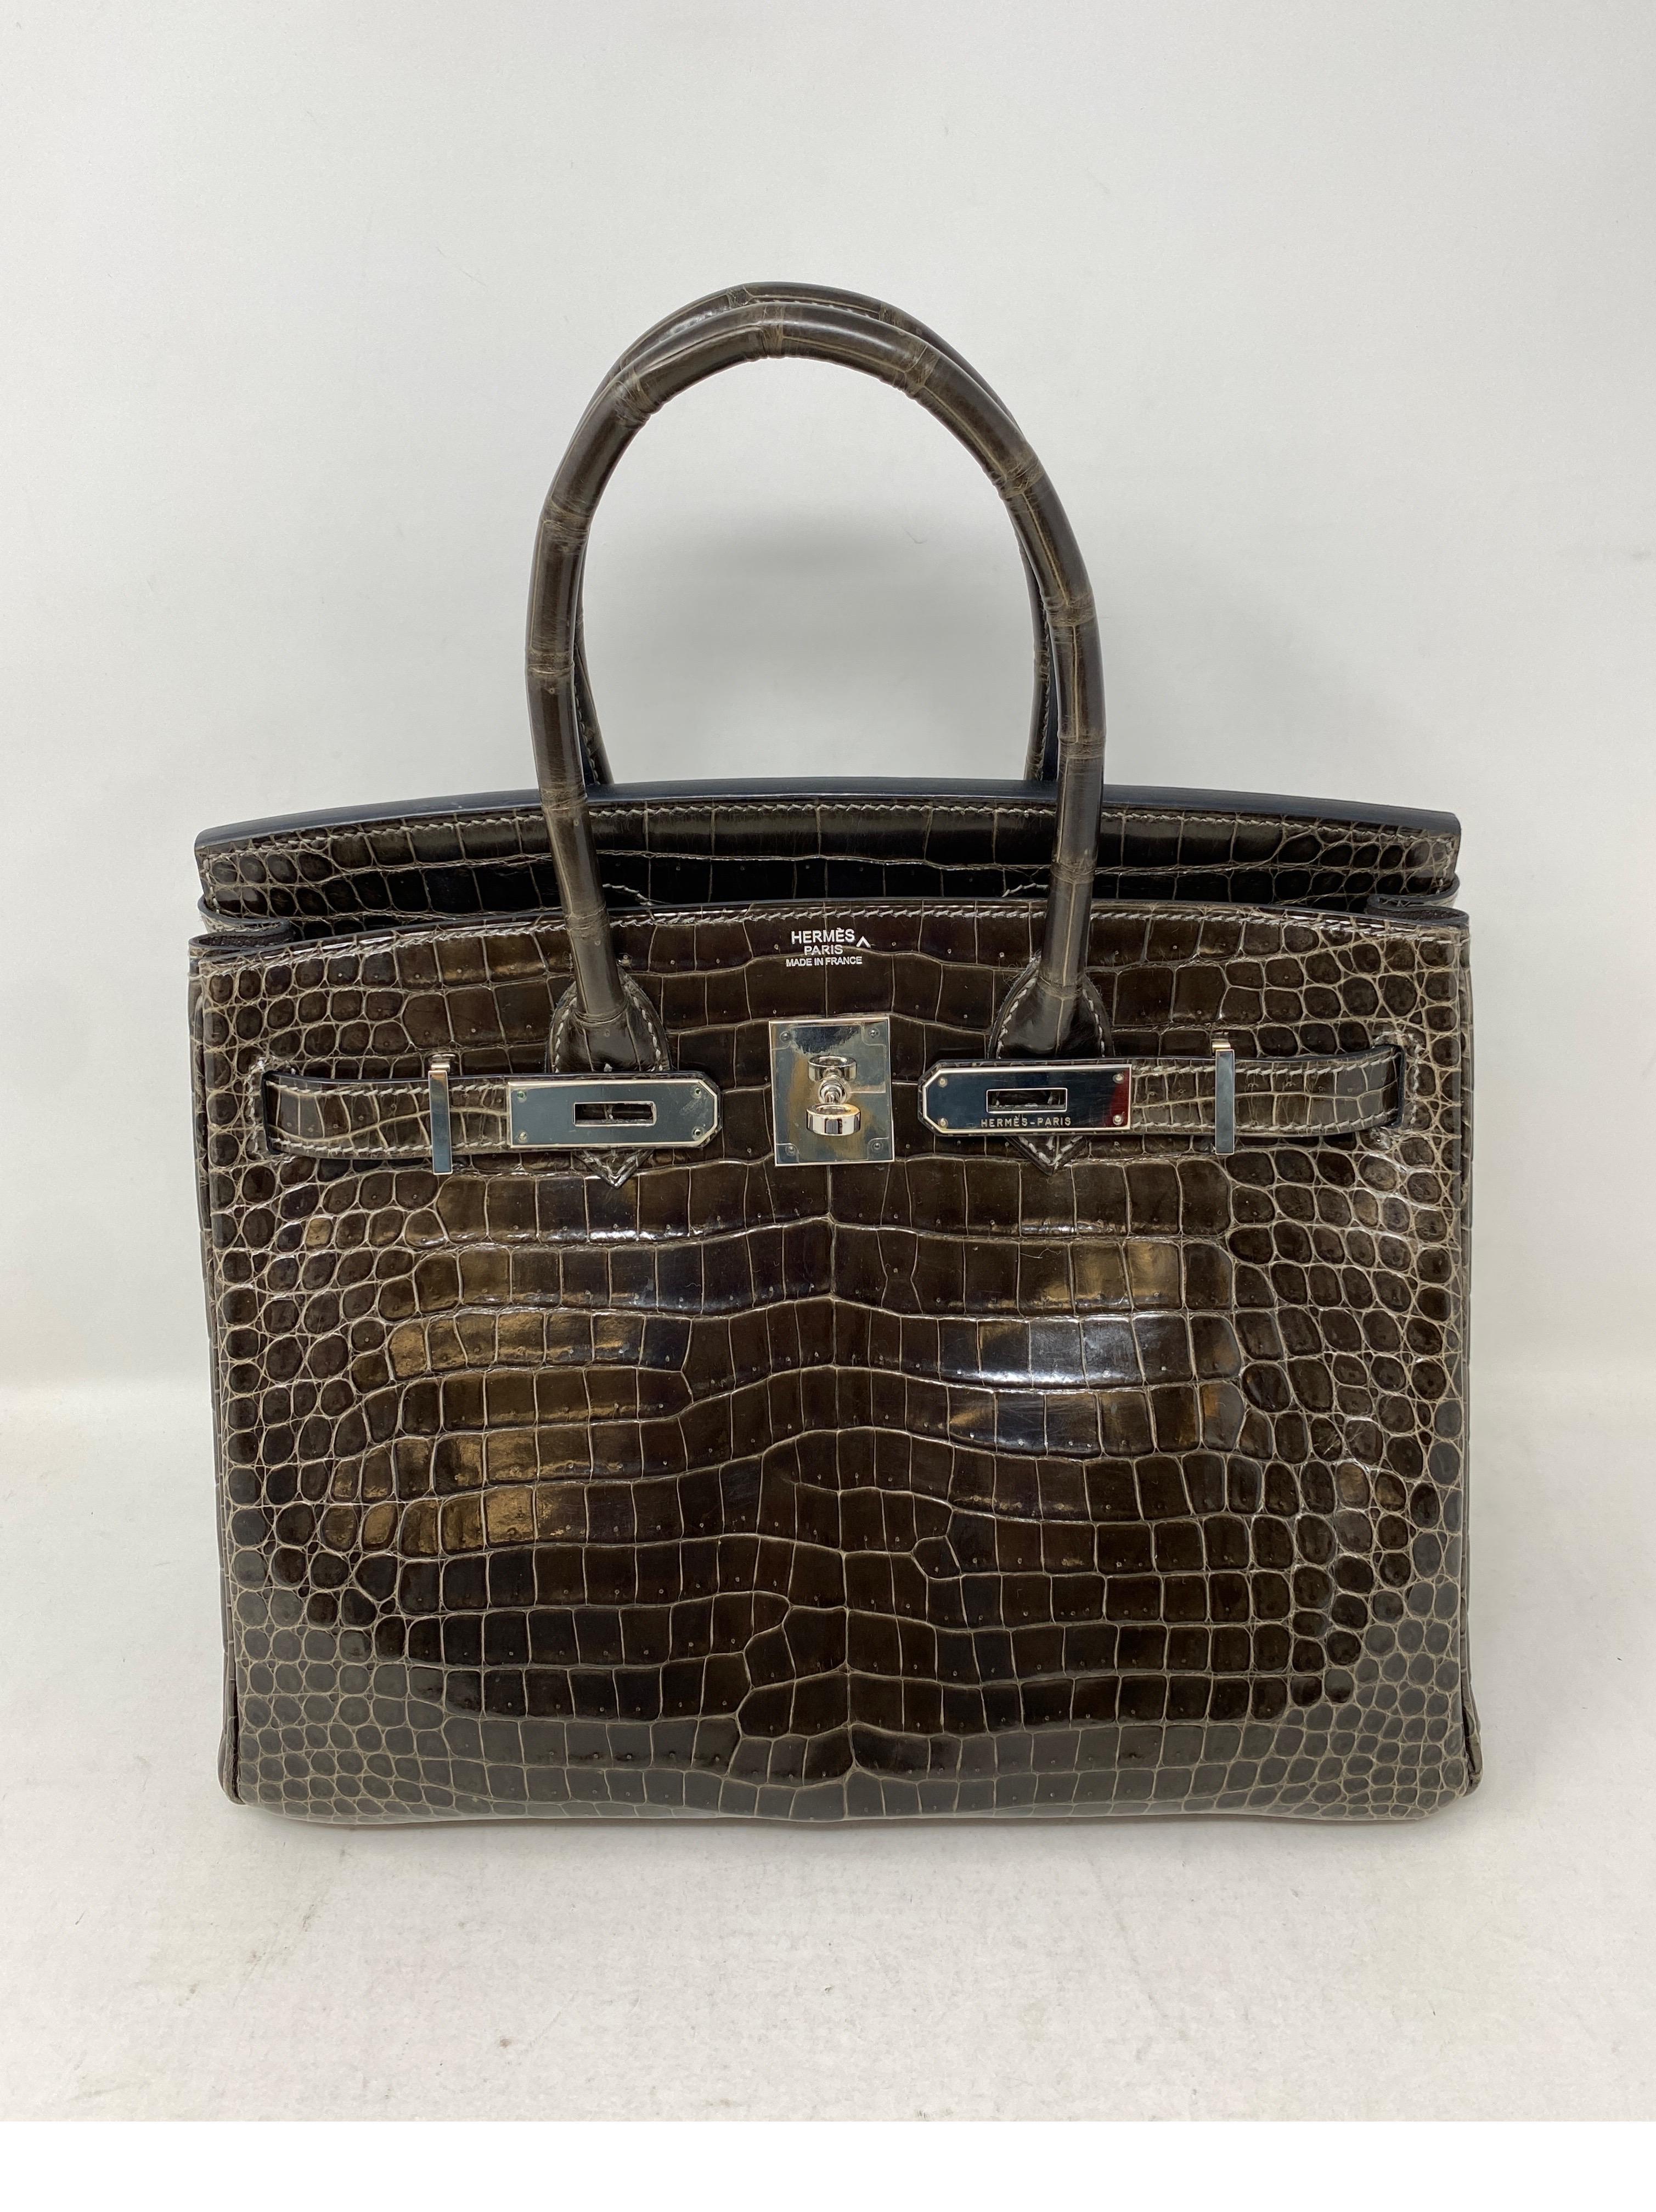 Hermes Gris Fonce Crocodile Birkin 30 Bag. Stunning dark grey exotic with palladium hardware. Good condition. Rare size. Beautiful rich color. Includes clochette, lock, keys, and dust cover. Guaranteed authentic. 